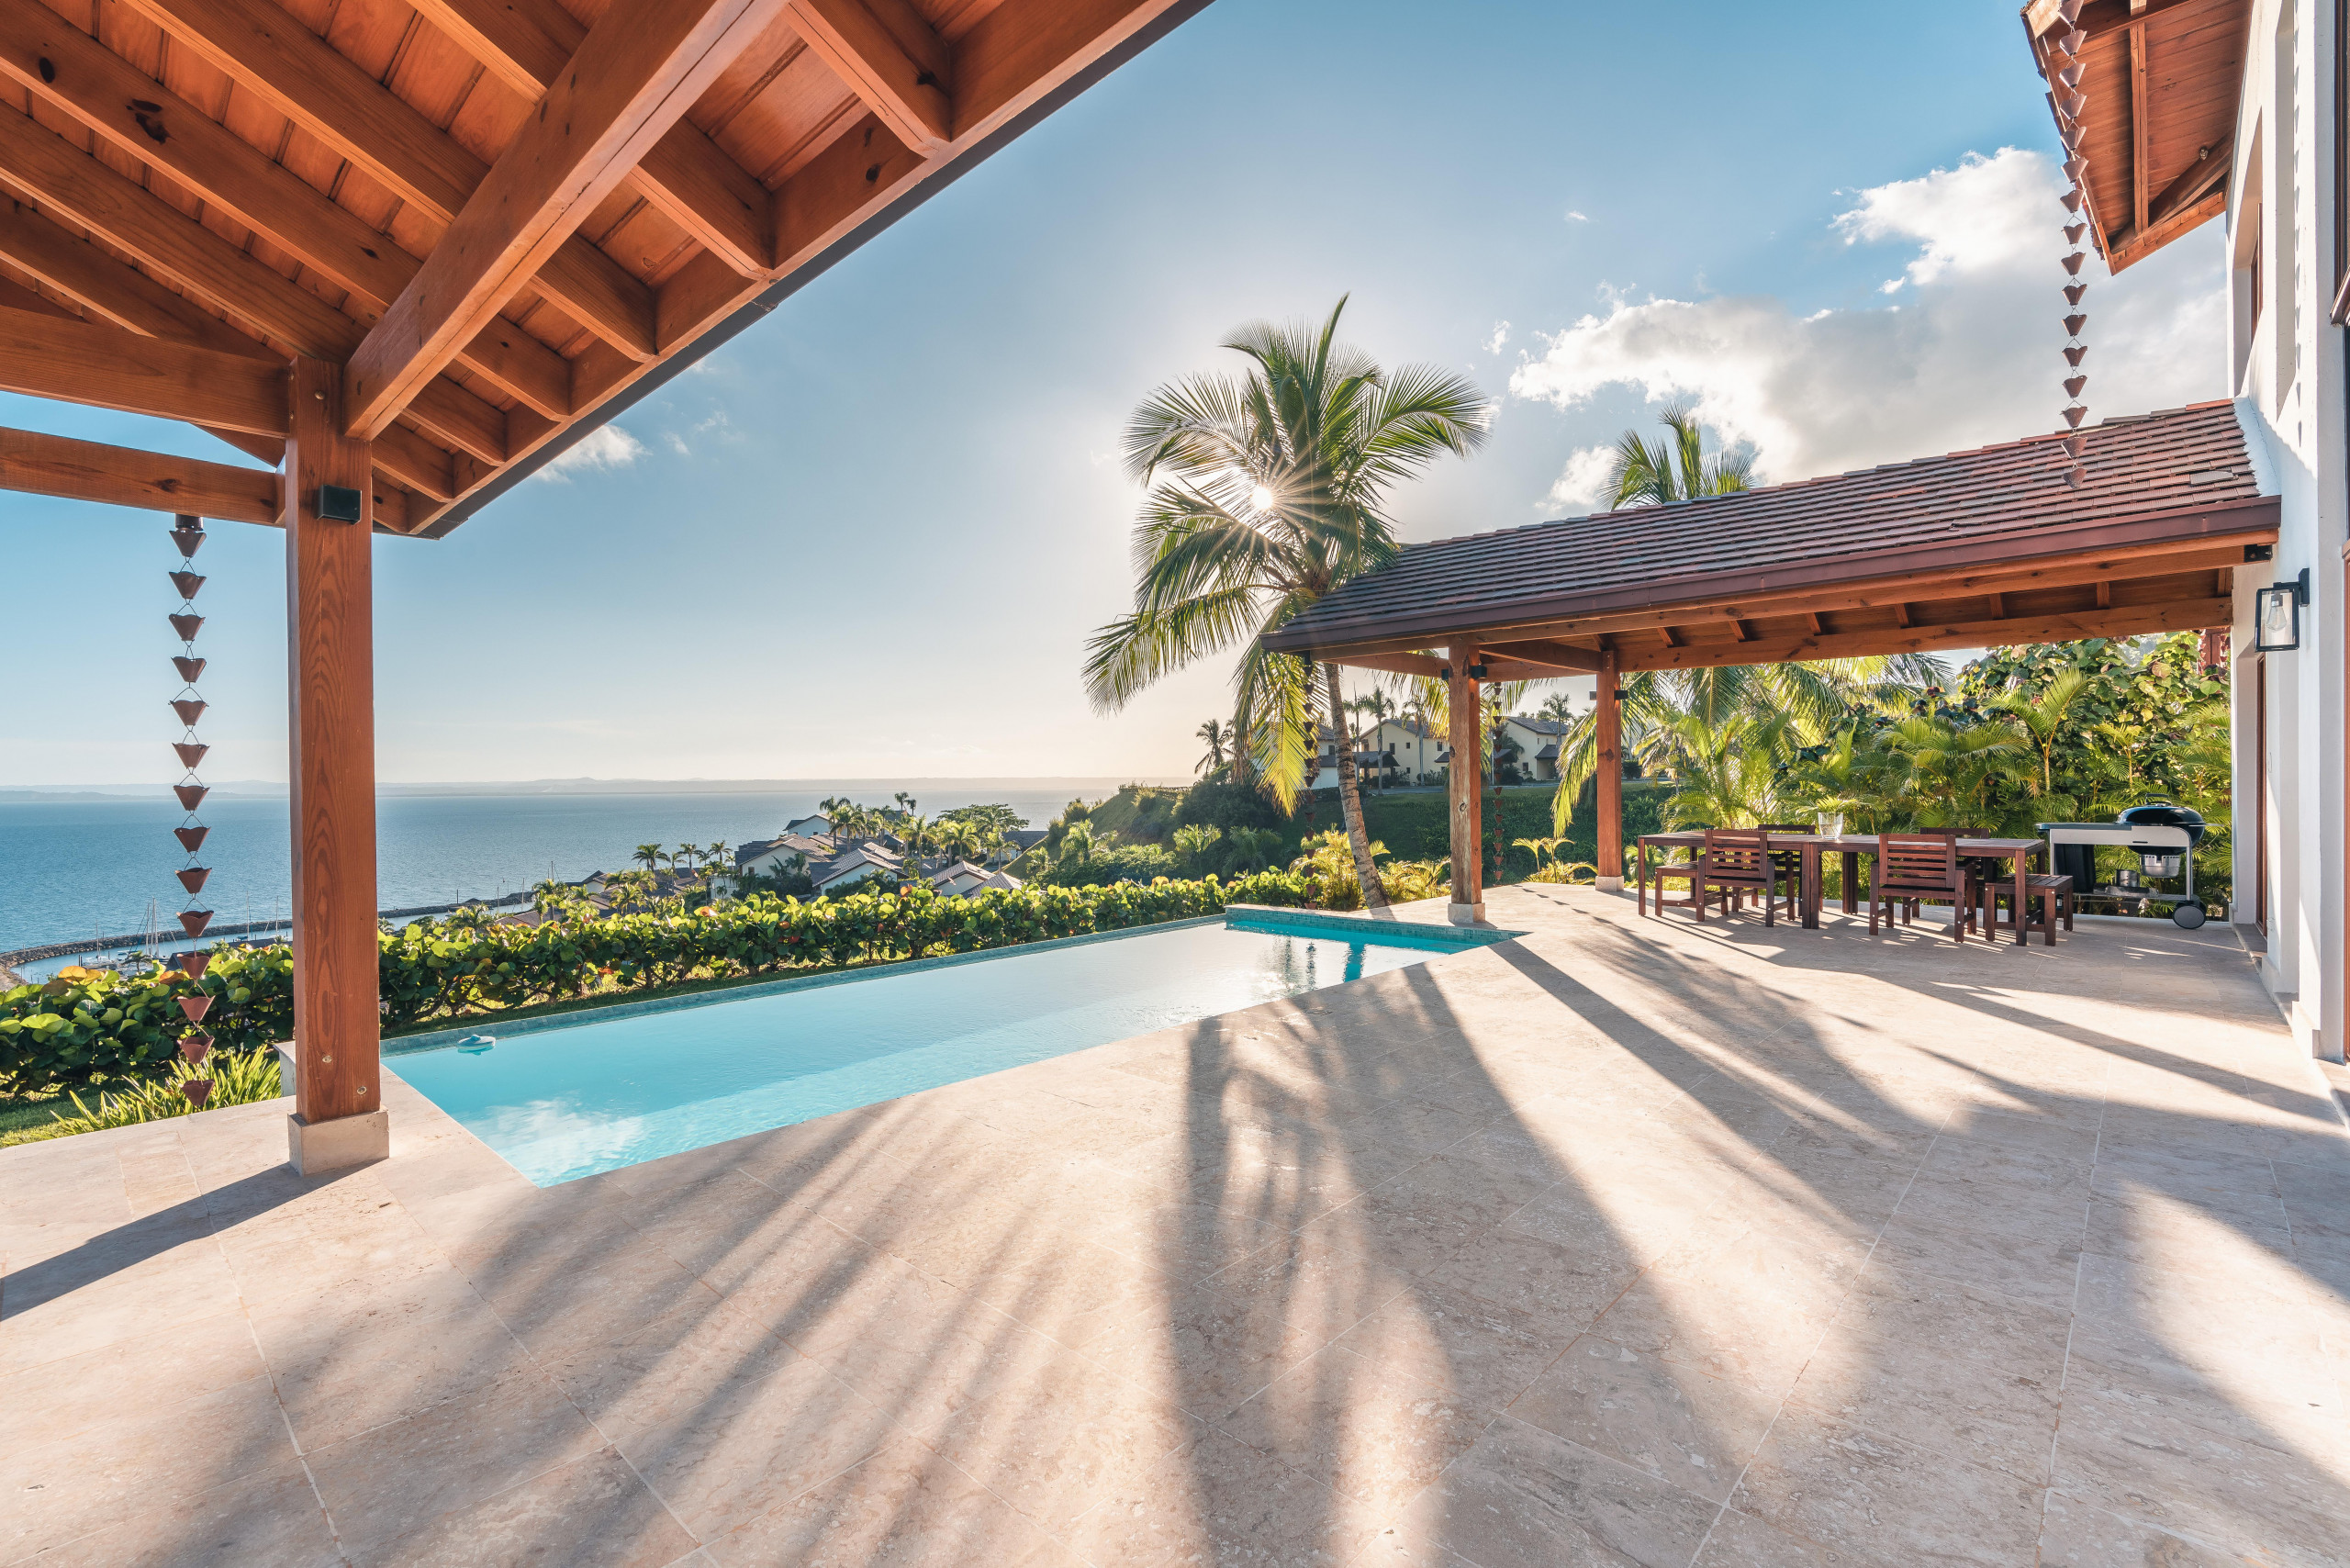 Property Image 1 - Luxe retreat at Puerto Bahia *Bkfst included*